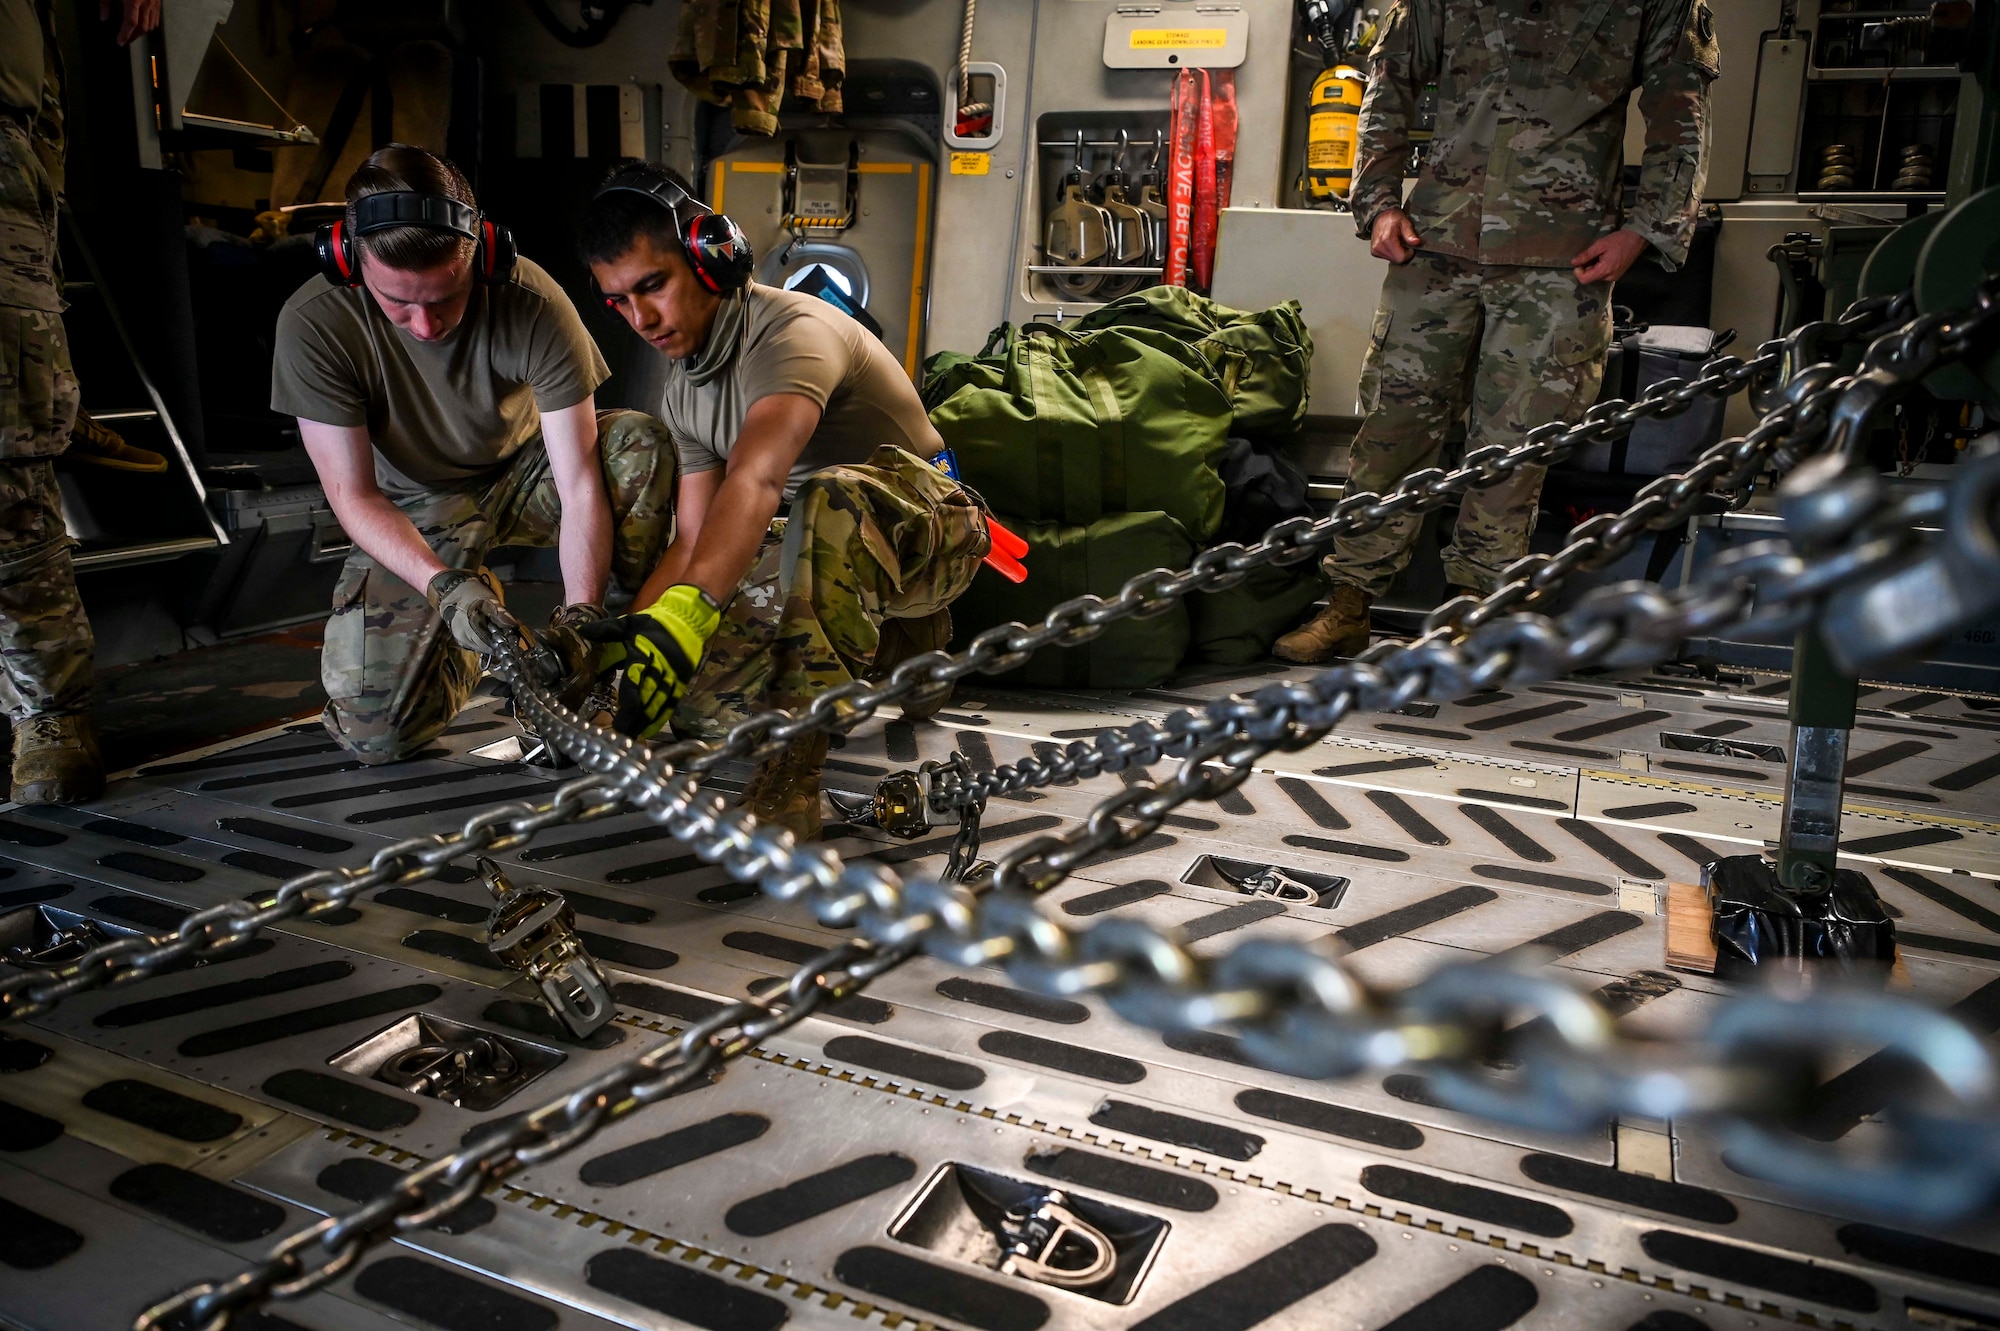 U.S. Air Force Airmen from the 732d Air Mobility Squadron and the 735th Air Mobility Squadron, located at Joint Base Elmendorf-Richardson in Alaska and Joint Base Pearl Harbor-Hickam in Hawaii, load Terminal High-Altitude Area Defense equipment onto a C-17 Globemaster III on Andersen Air Force Base, Guam, March 4, 2022.